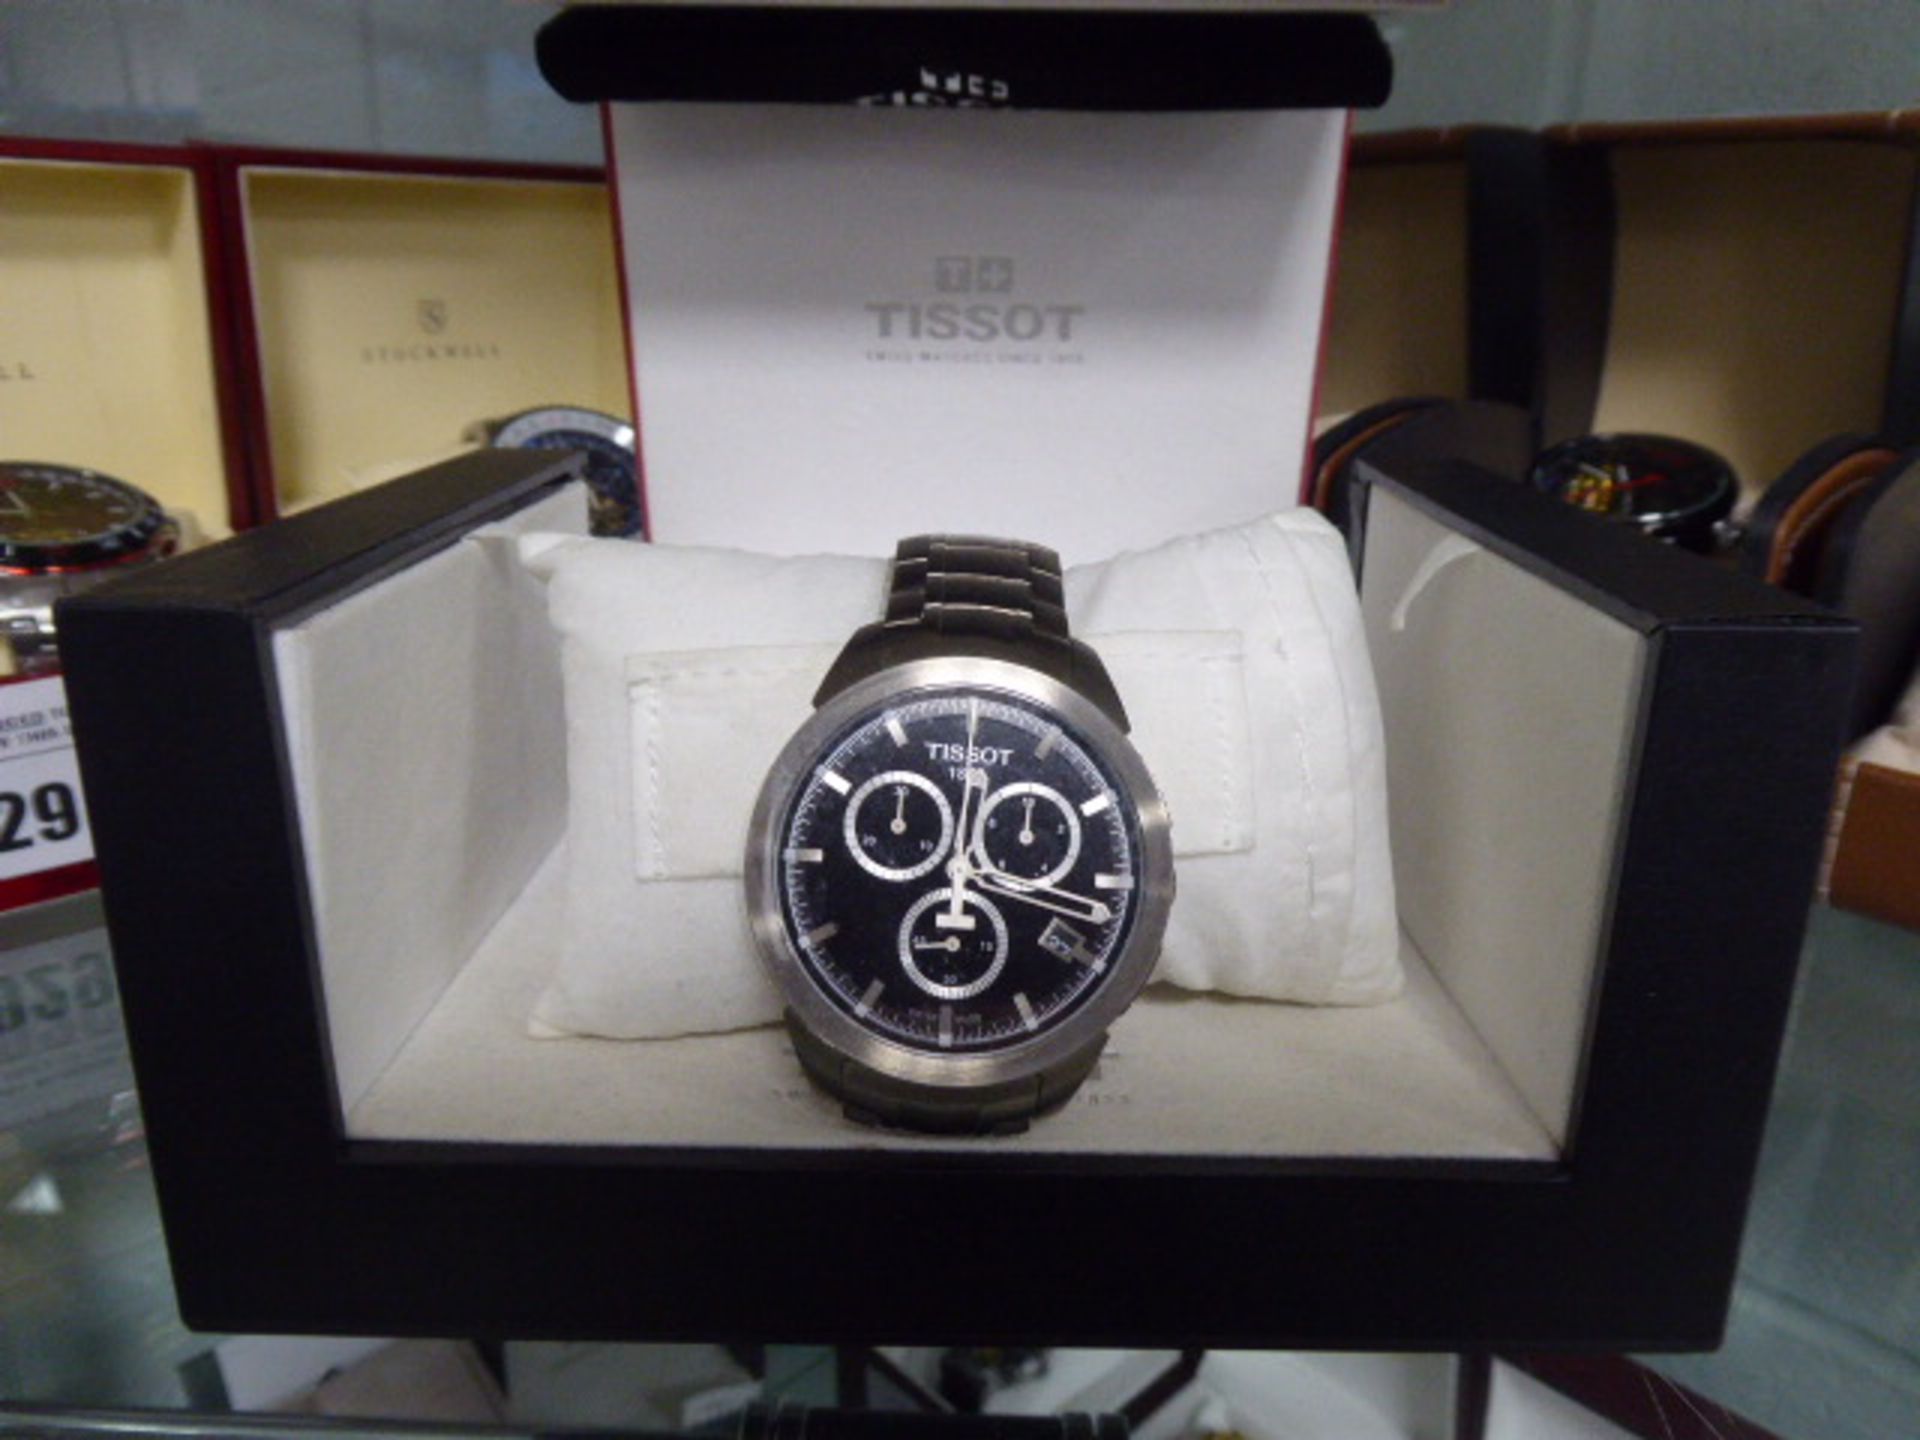 Tissot stainless steel strap wristwatch with box